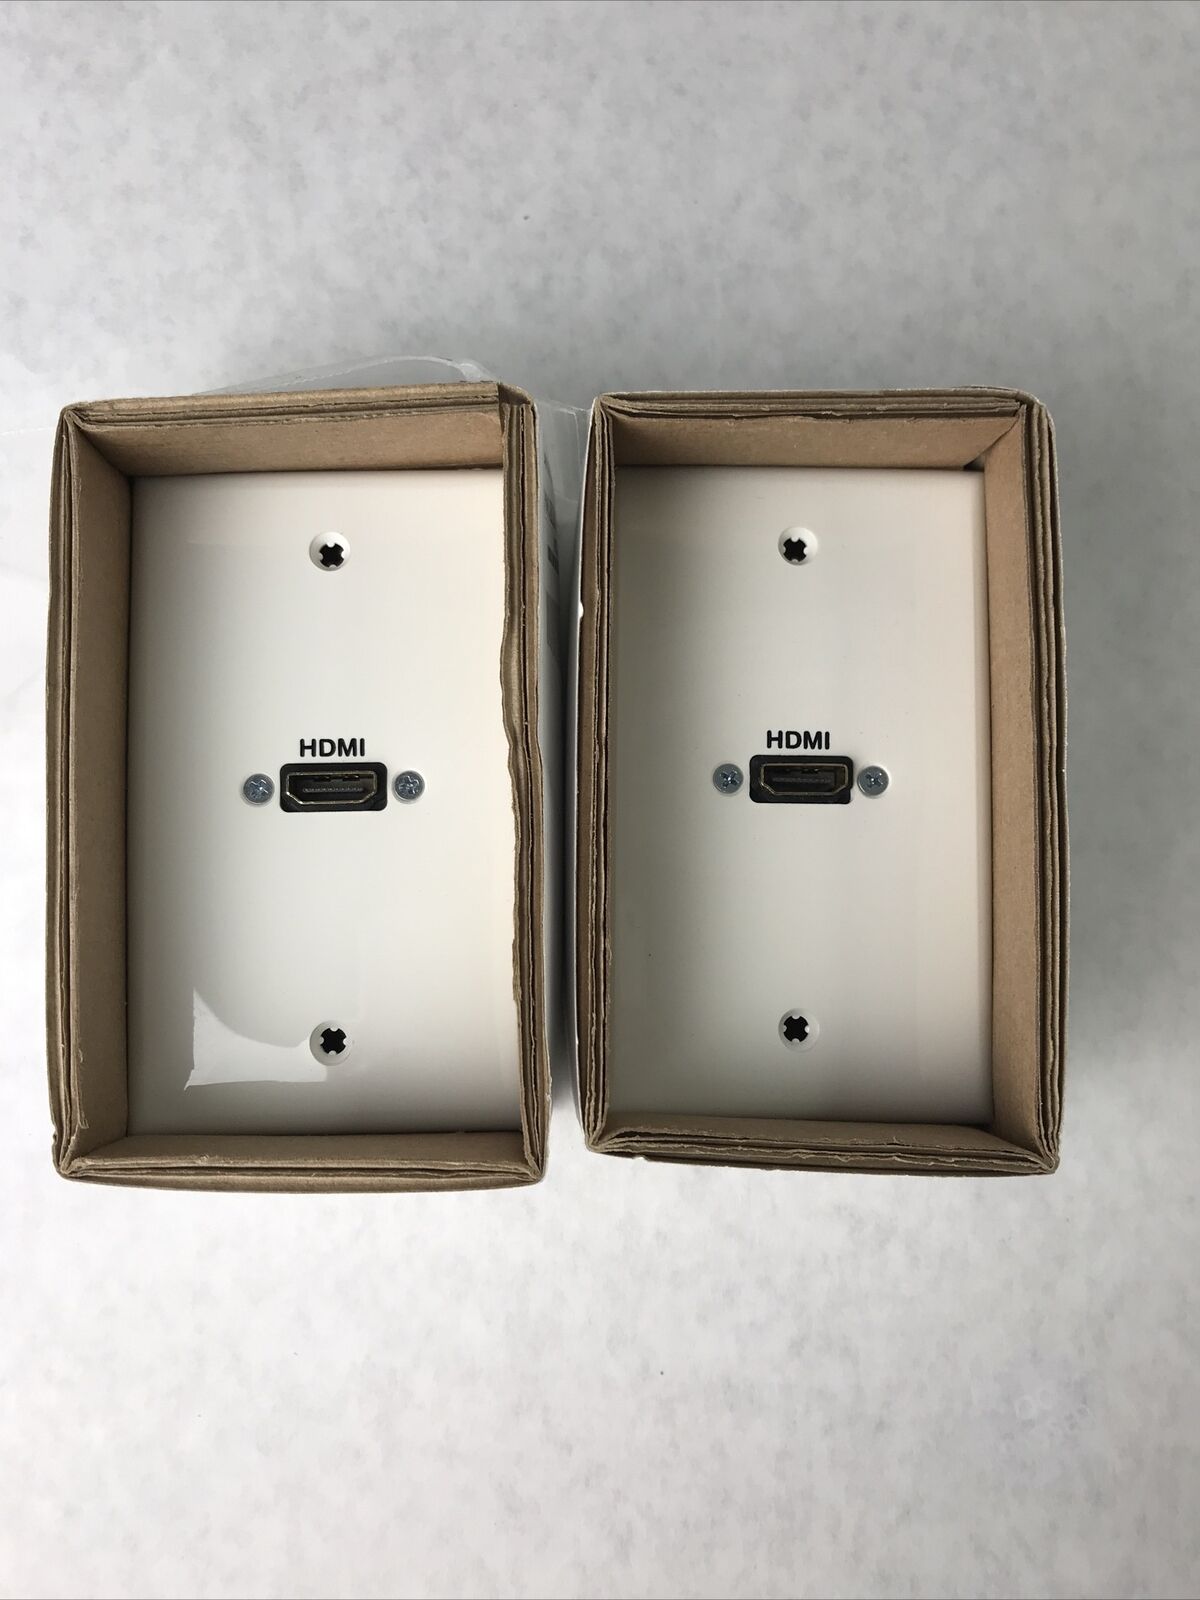 Lot of (2) Panel Crafters 1-Gang HDMI Wall Plate PCD-1500-P-W